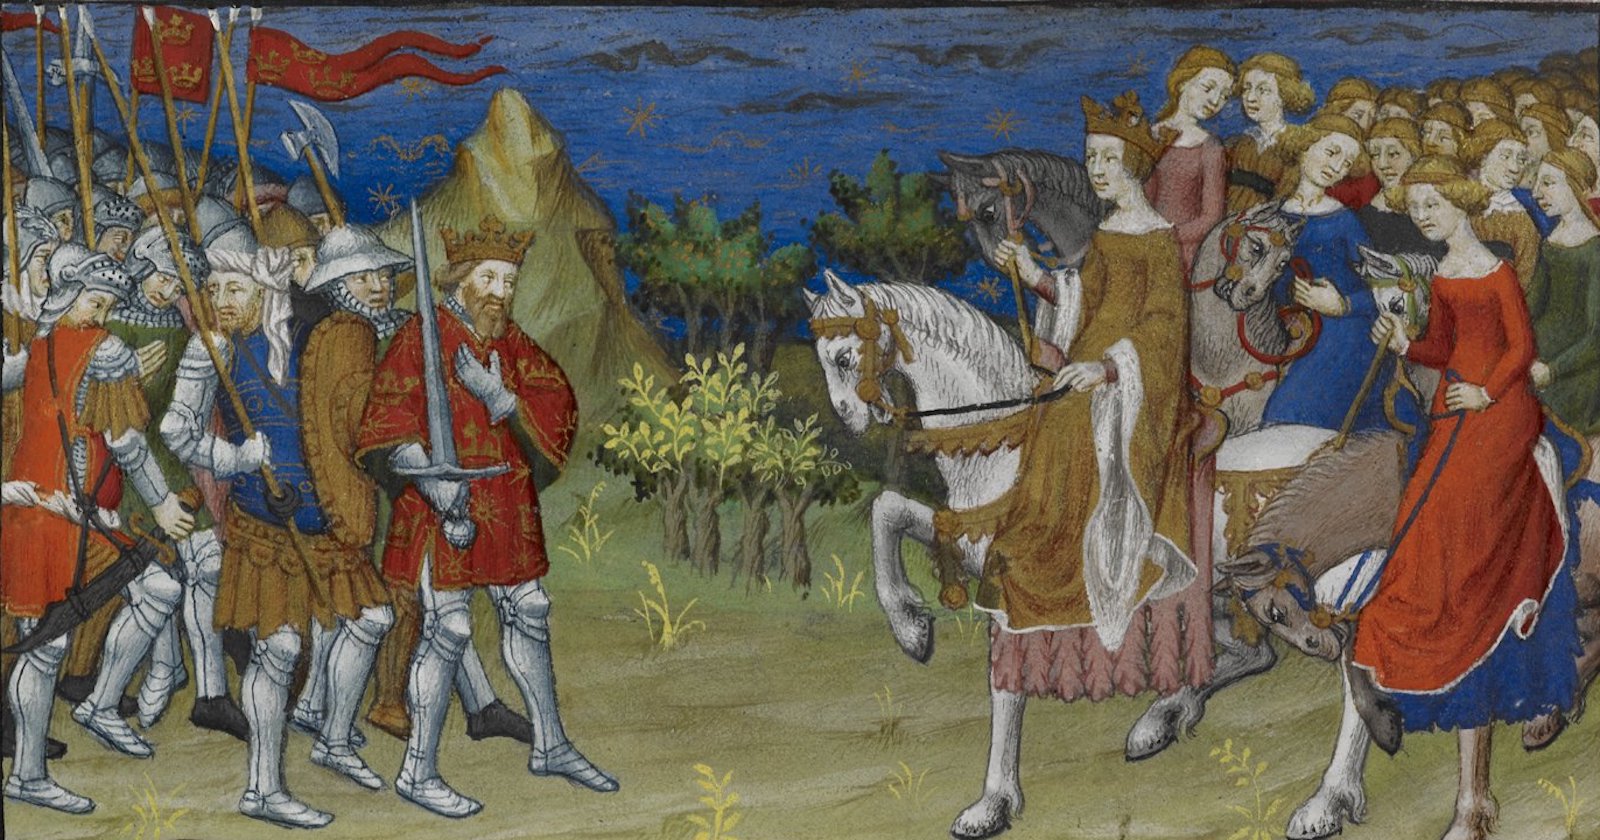 Detail of a miniature of the meeting between Alexander and the Amazons. Image taken from f. 47v of Historia de proelis in a French translation (Le Livre et le vraye hystoire du bon roy Alixandre), c. 1420. British Library. Public Domain.